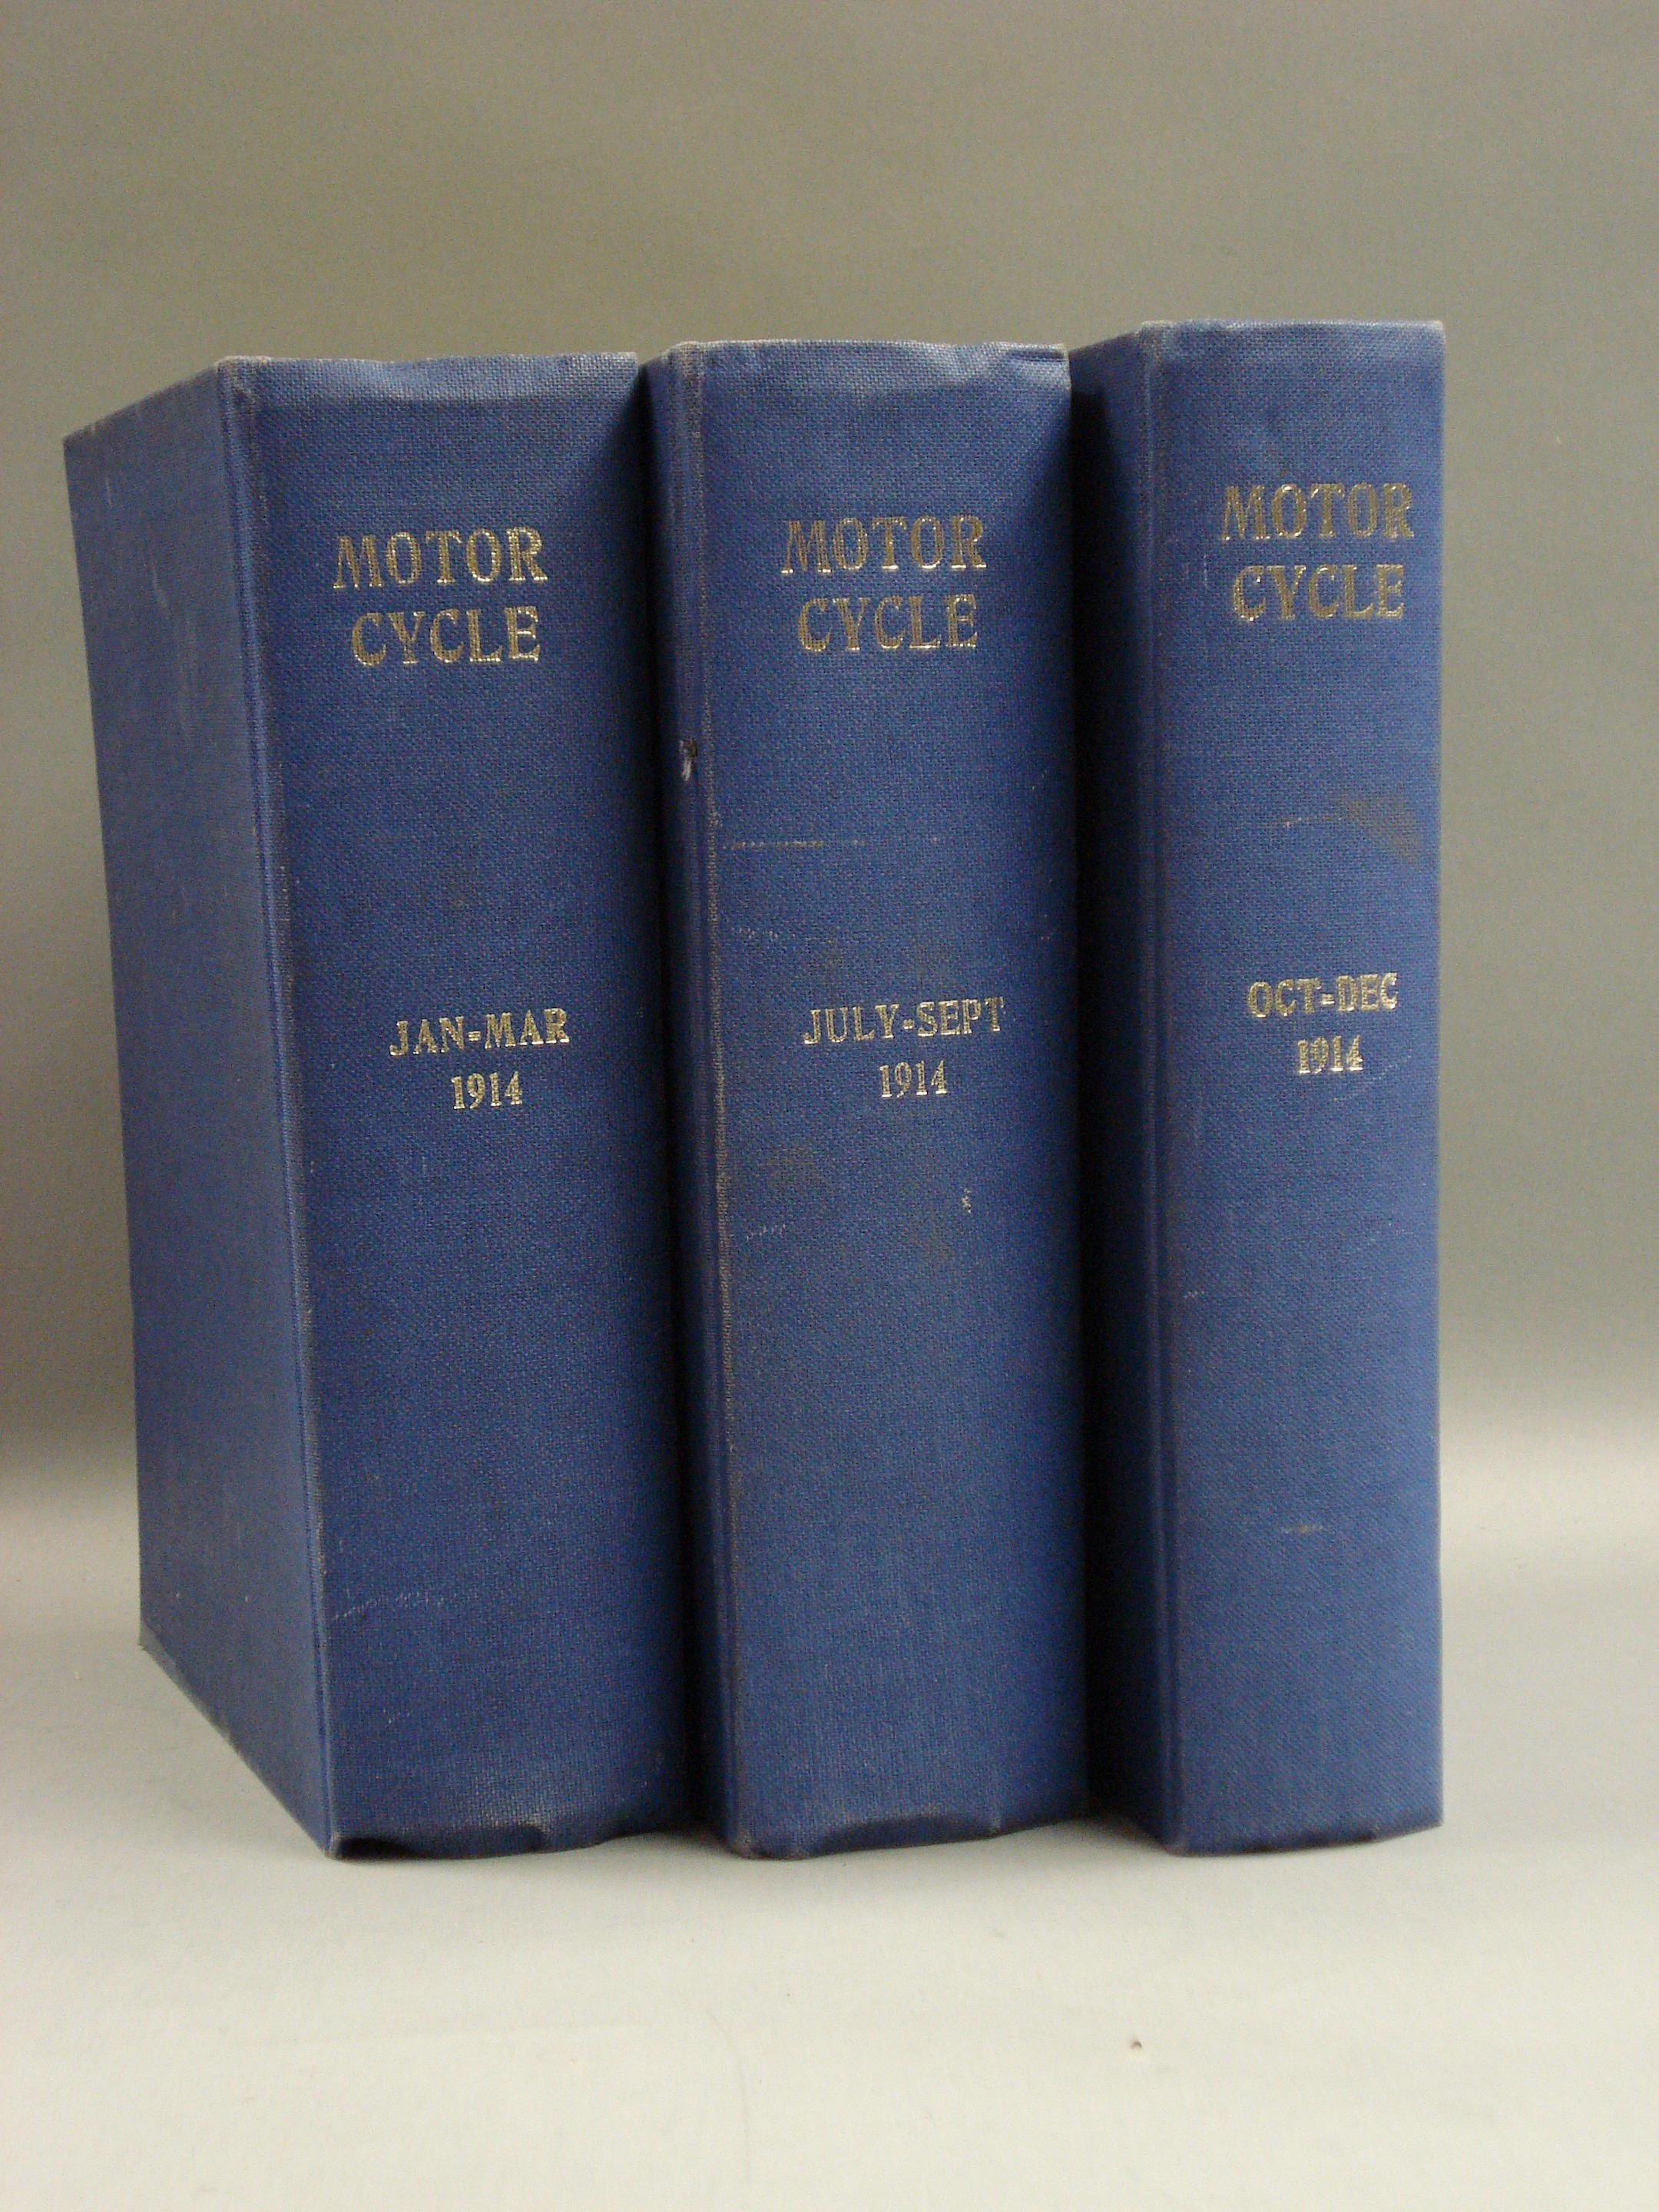 The Motor Cycle - Volumes 12 and 13 1914,